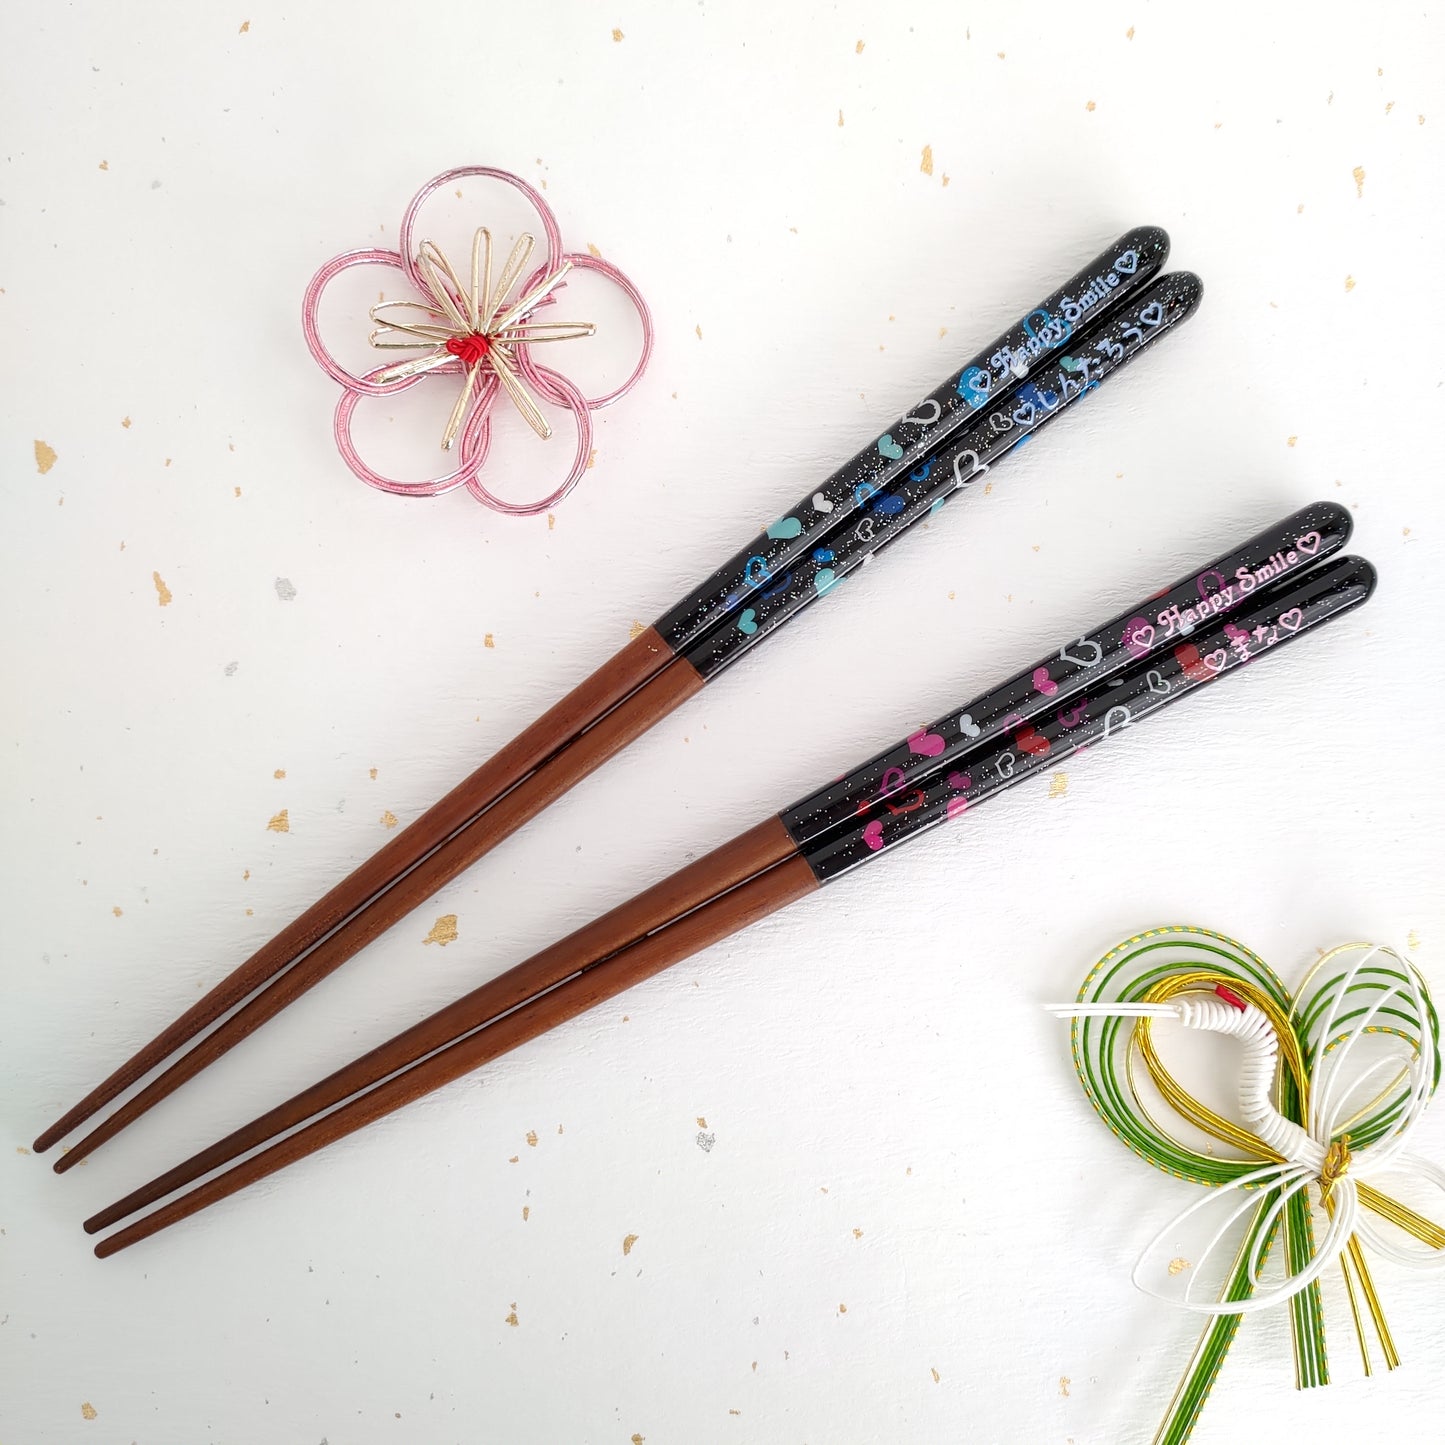 Cute Japanese chopsticks with shiny heart design blue pink - SINGLE PAIR WITH ENGRAVED WOODEN BOX SET